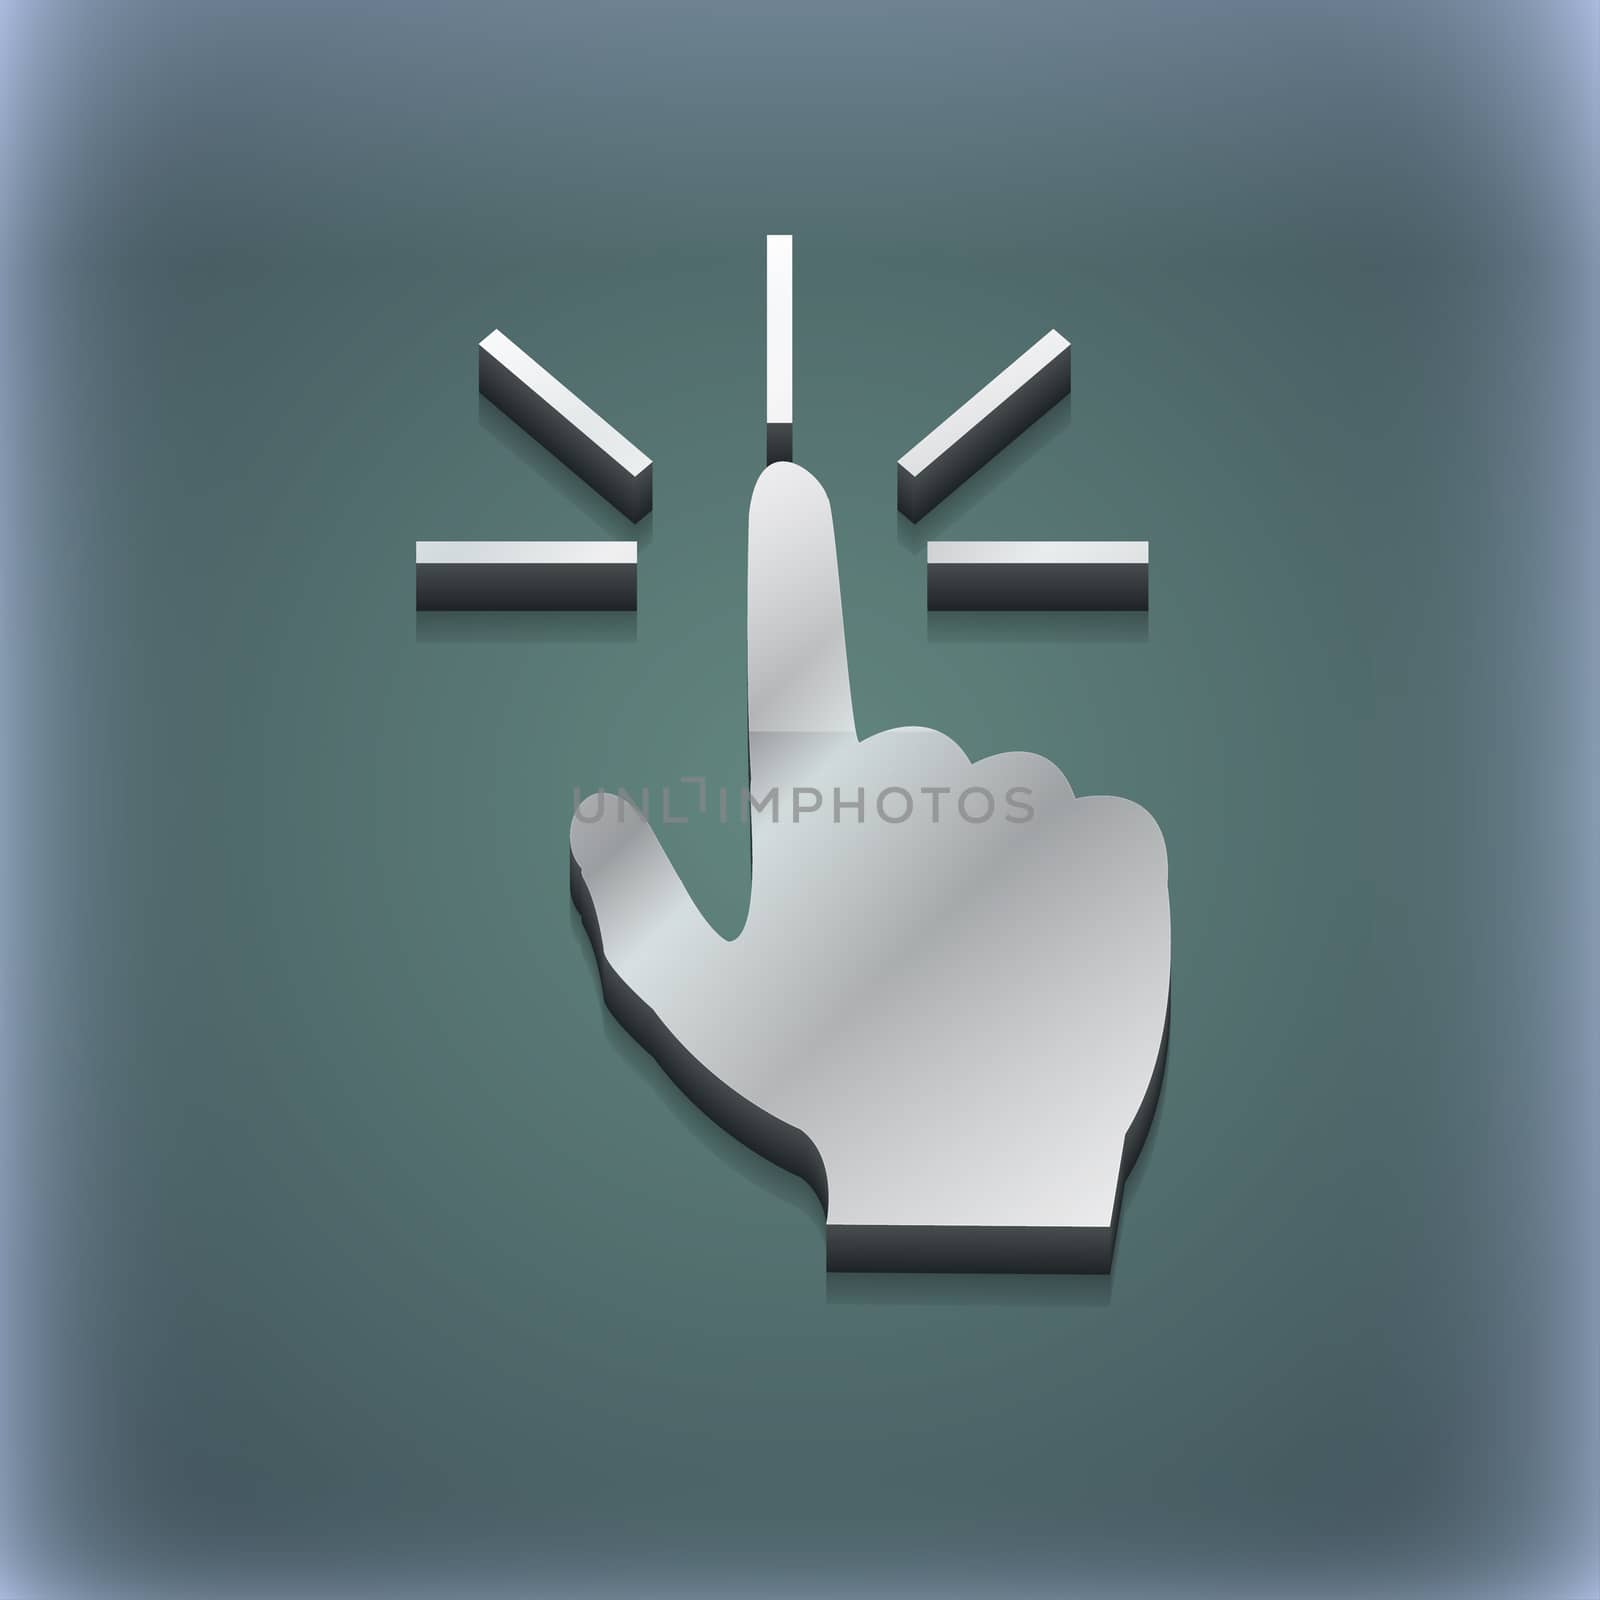 Click here hand icon symbol. 3D style. Trendy, modern design with space for your text illustration. Raster version